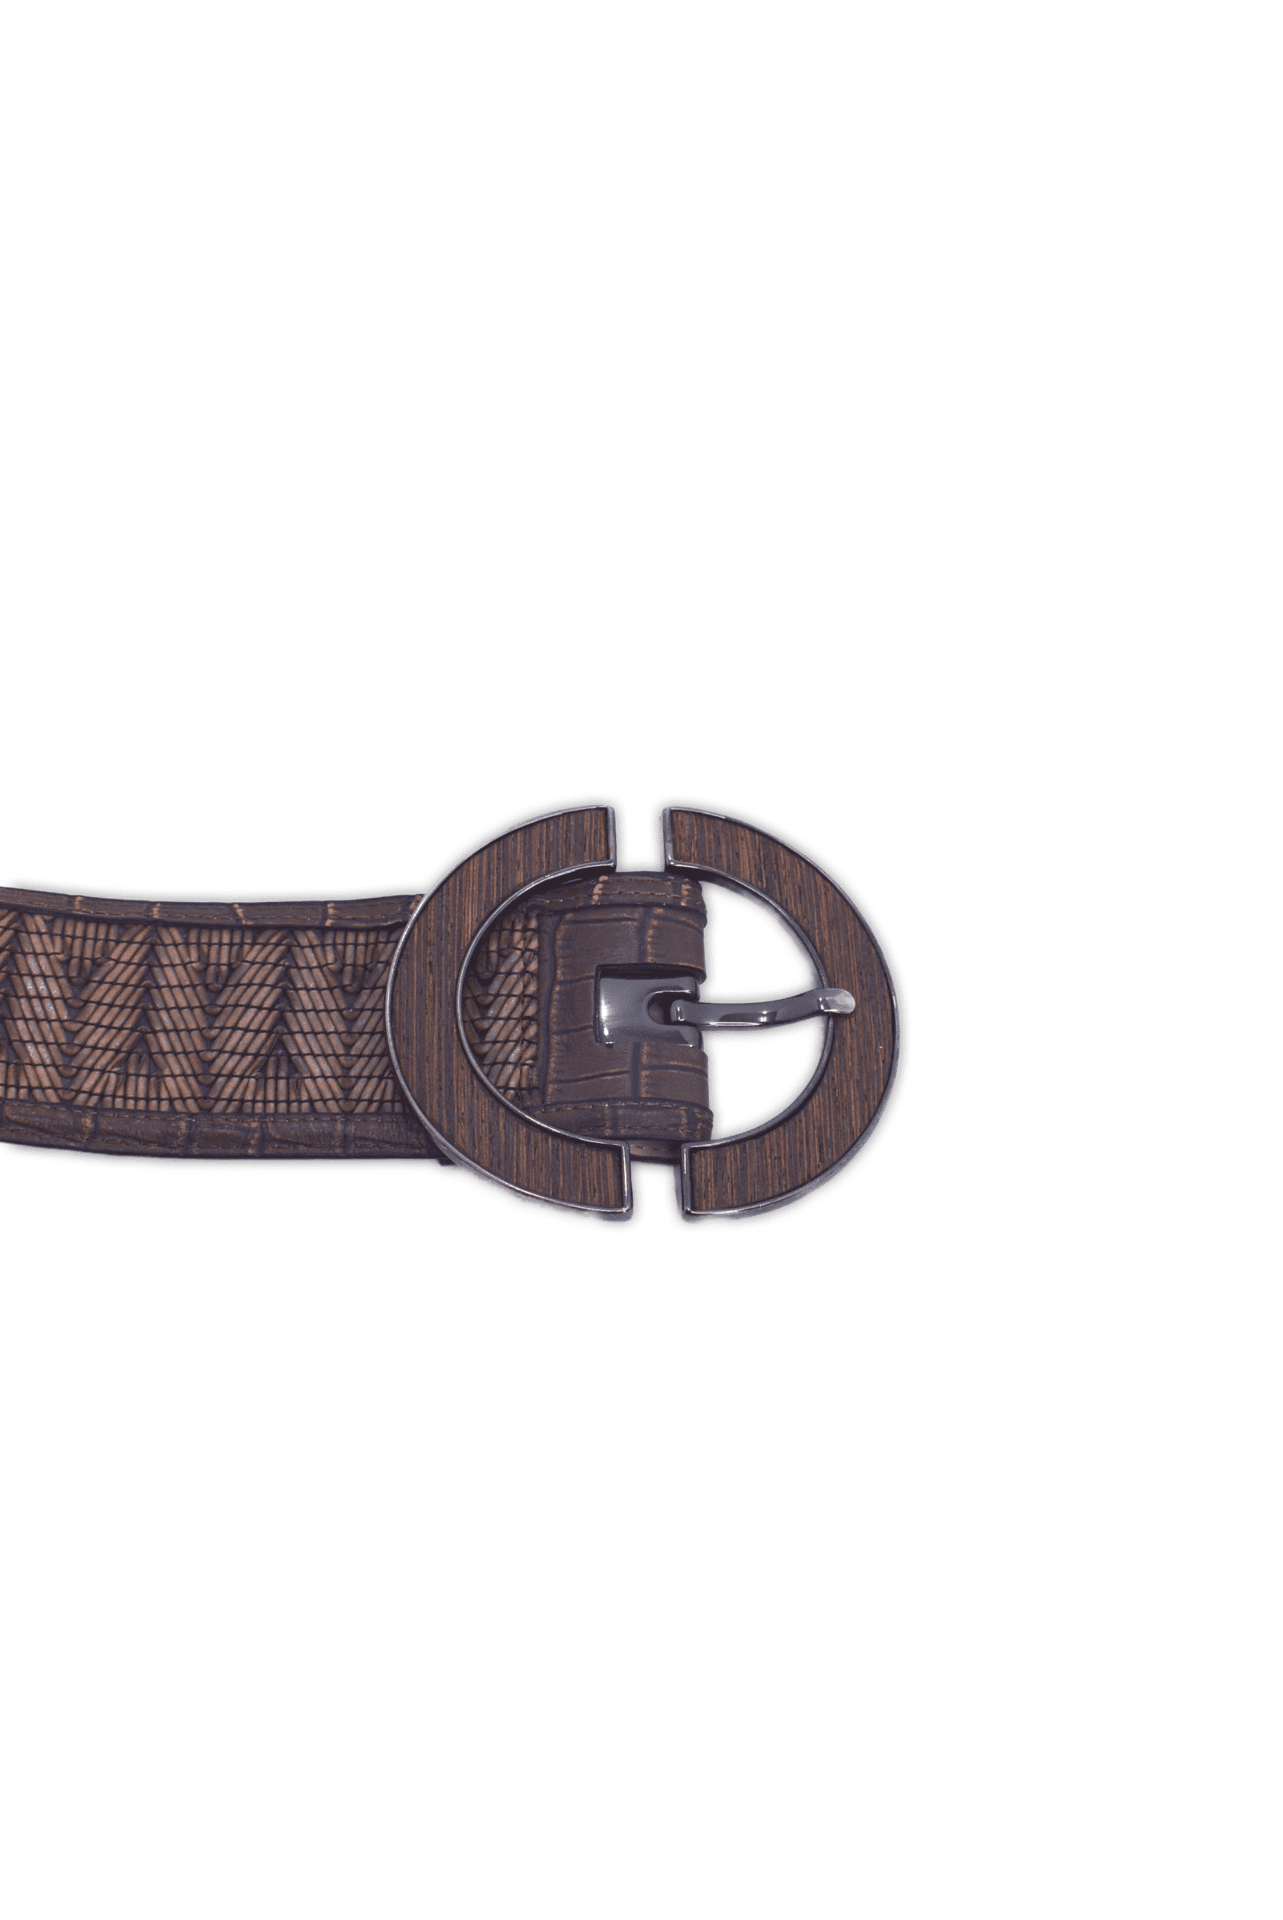 Leather belt featuring a wooden horseshoe buckle and an intricate textured design. This medium sized belt has a width of 6cm and a length of 97cm. The Buckle has a width of 10.5cm and a length of 10cm.